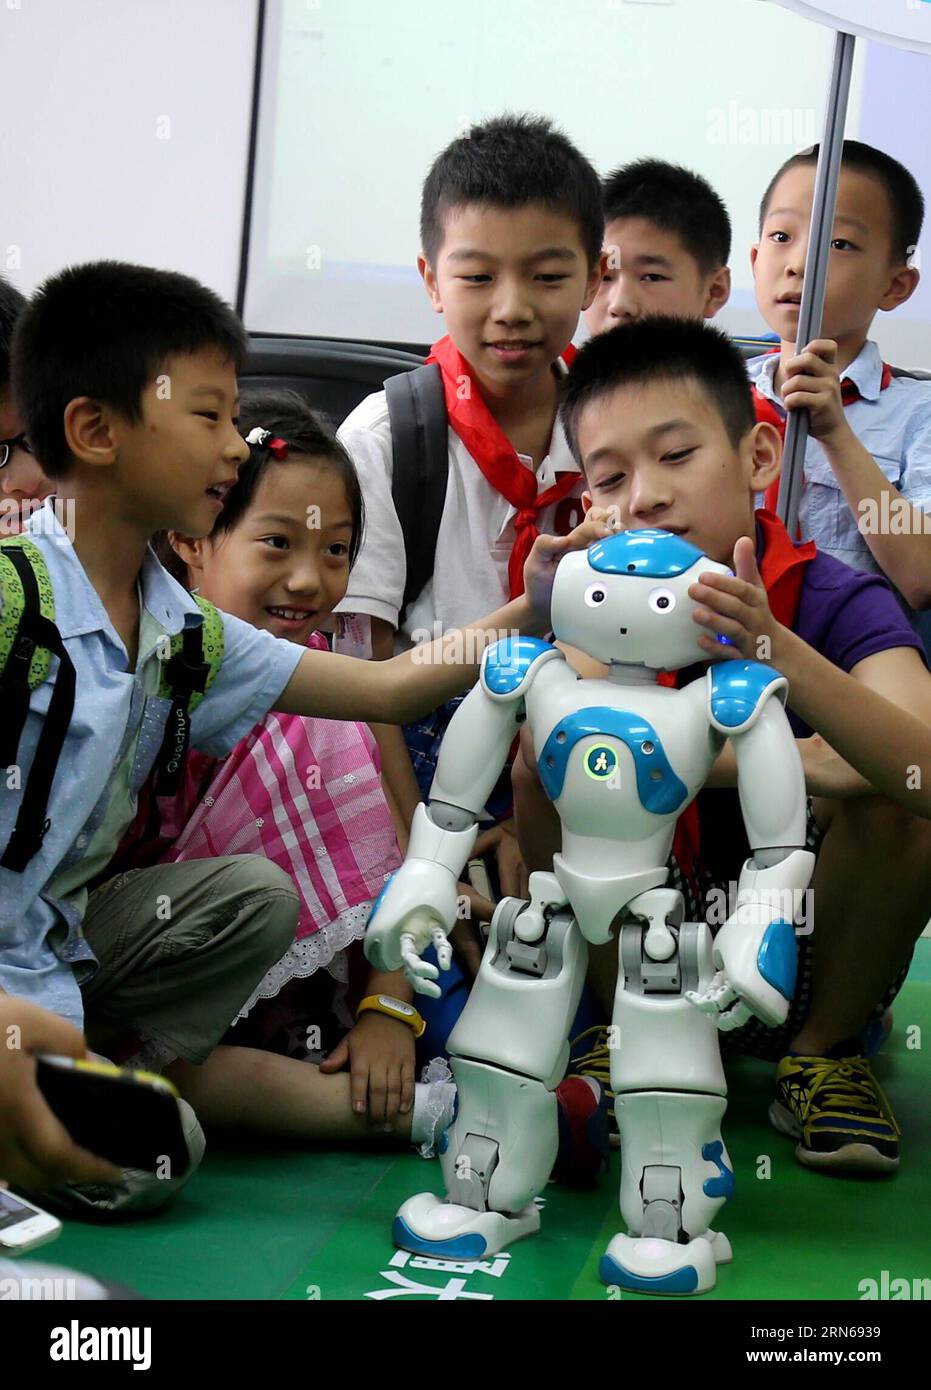 (150716) -- SHANGHAI, July 16, 2015 -- Children interested in scientific invention meet Robot Nao at a robot laboratory in Shanghai Jiaotong University, east China, July 16, 2015. Nao is a 58-centimeter tall robot developed and manufactured by Aldebaran Robotics, a Paris-based company. ) (dhf) CHINA-SHANGHAI-CHILDREN-MEET-ROBOT (CN) LiuxYing PUBLICATIONxNOTxINxCHN   150716 Shanghai July 16 2015 Children interested in Scientific Invention Meet Robot Nao AT a Robot Laboratory in Shanghai Jiaotong University East China July 16 2015 Nao IS a 58 centimeter Tall Robot Developed and Manufactured by A Stock Photo